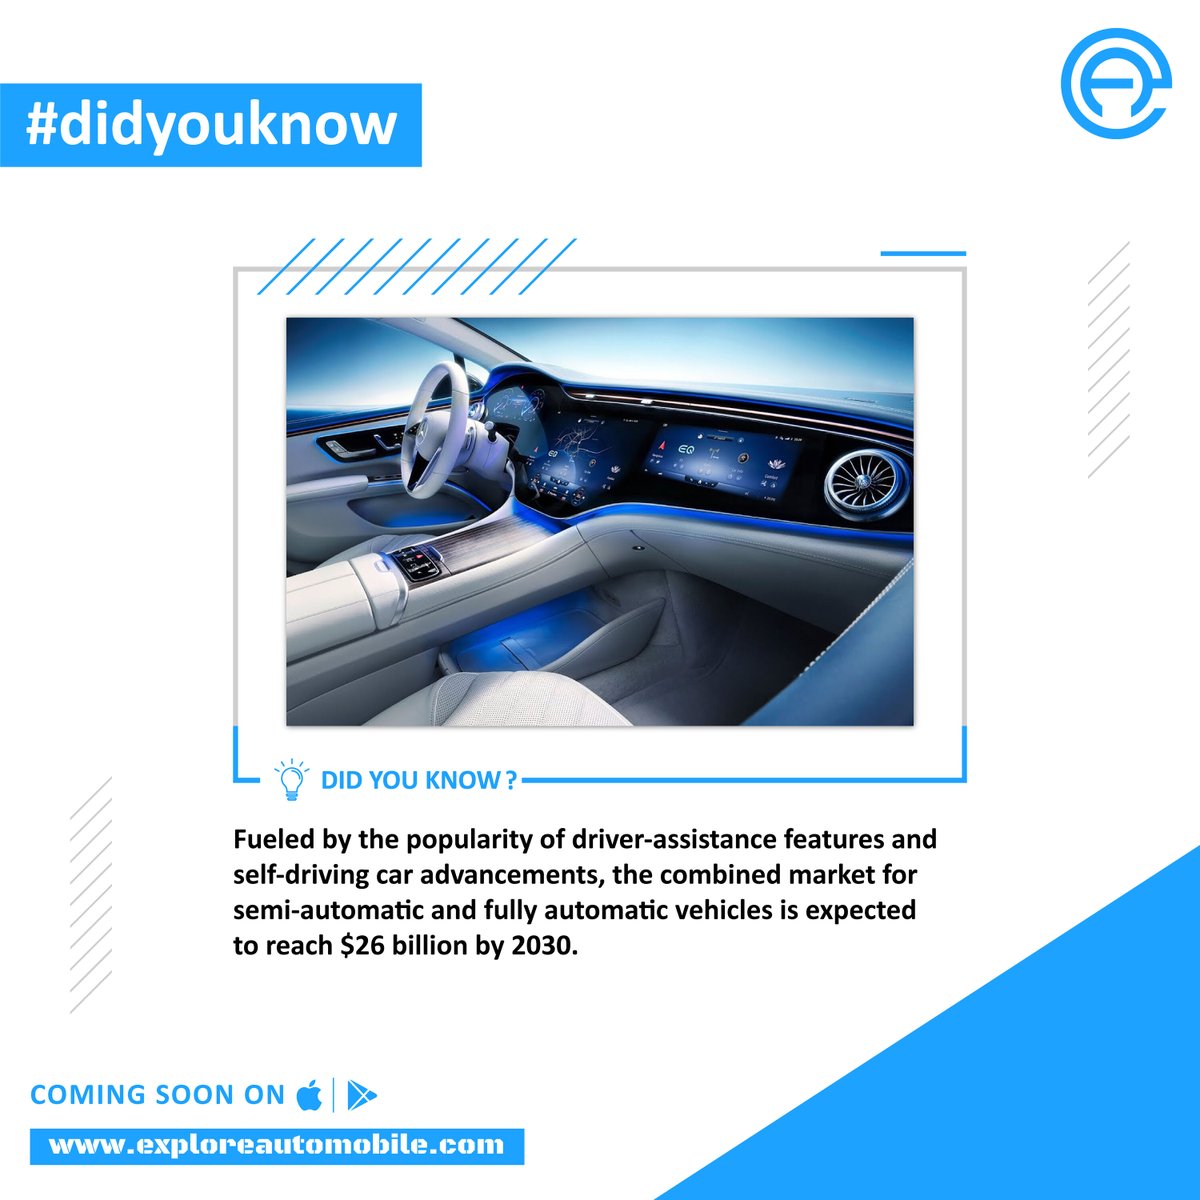 Shifting gears is so last decade. The future of driving is hands-free and headed towards $26 billion by 2030! #SelfDrivingCars #AutonomousVehicles #FutureofMobility
.
.
Follow Now: @EneDrive 
.
Visit our website: exploreautomobile.com.
.
.
.
#didyouknow #funFact #drivingHistory